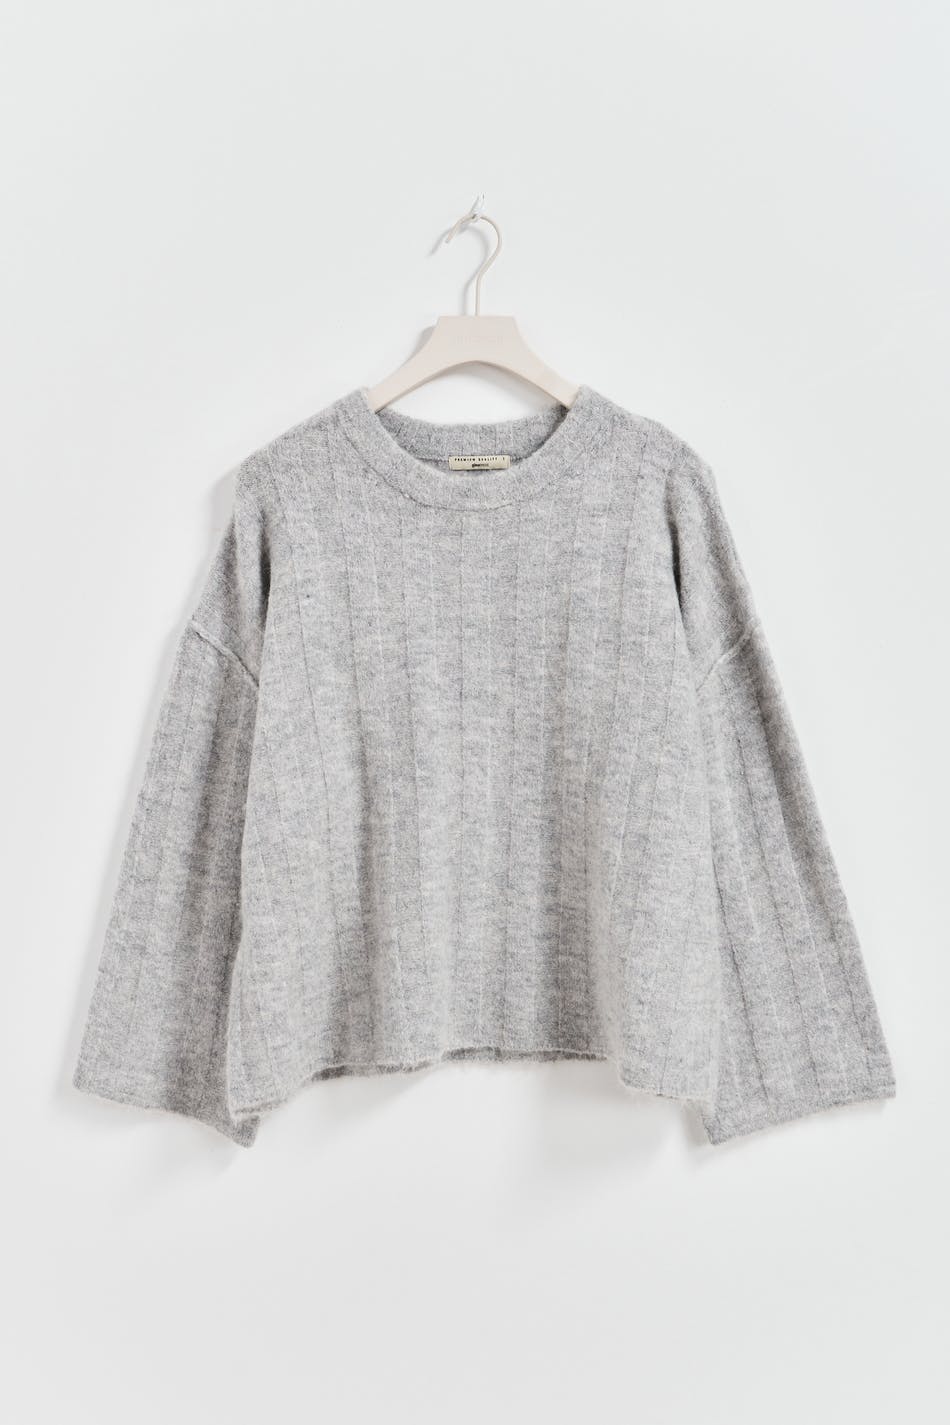 Gina Tricot - Wide rib knitted sweater - stickade tröjor - Grey - S - Female